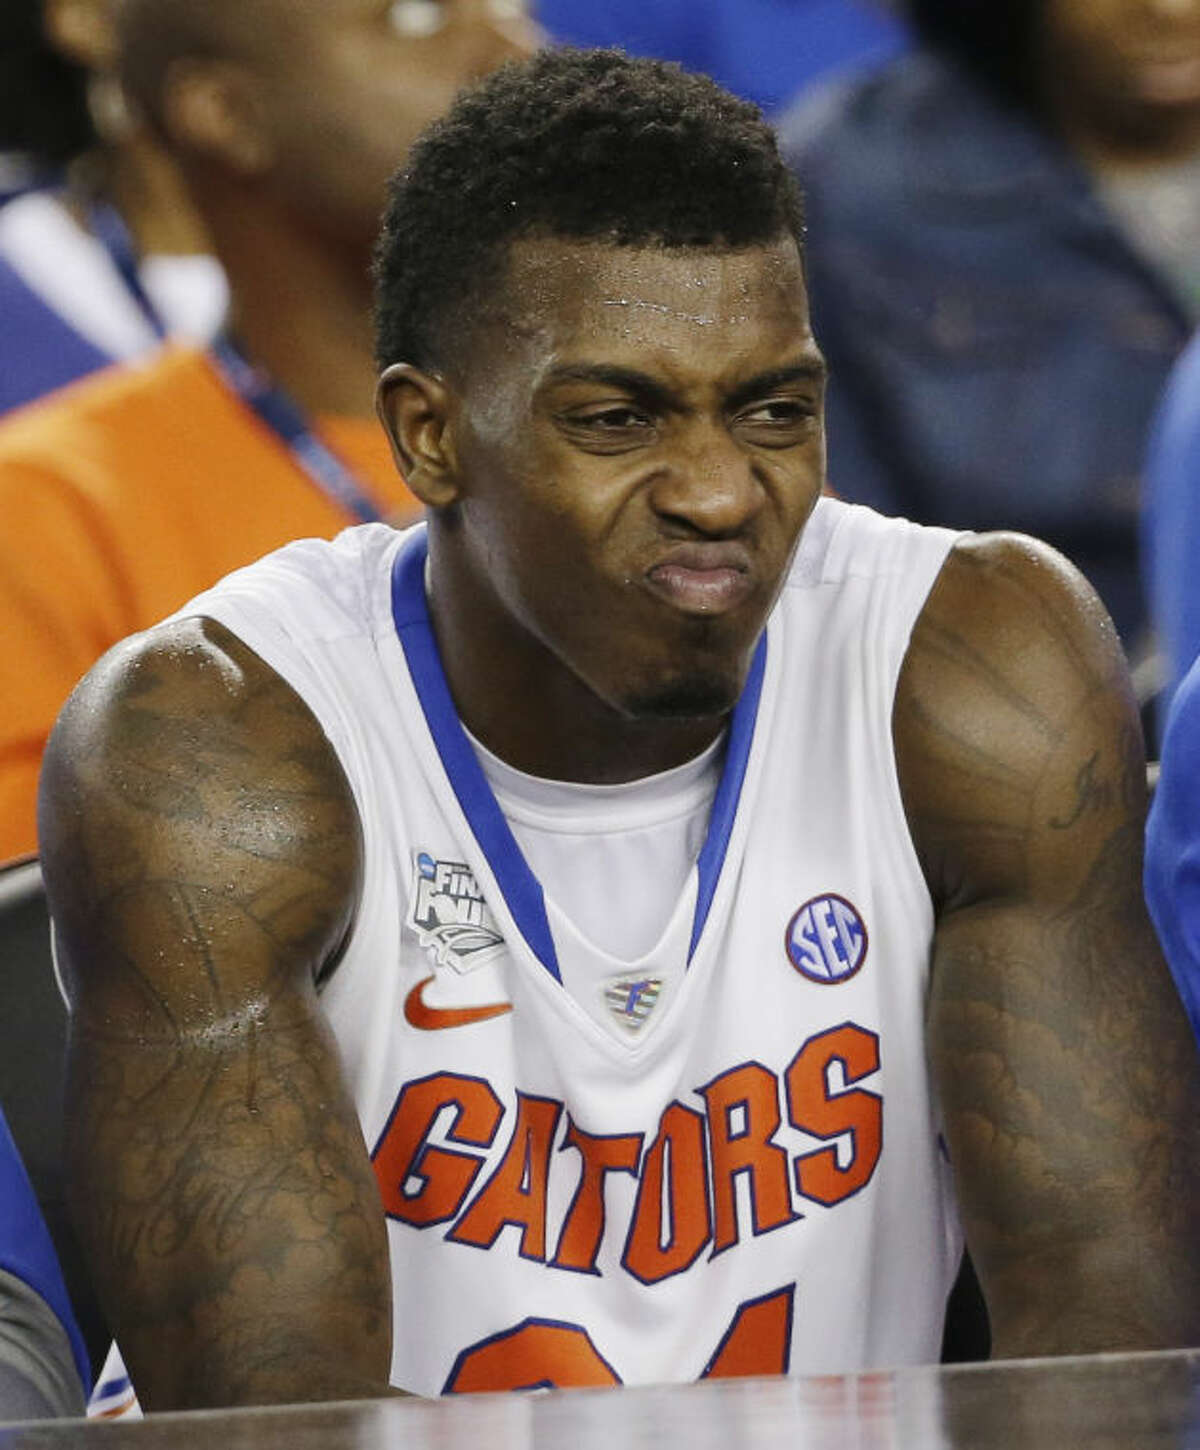 Florida forward Casey Prather (24) frowns as he watches action against Connecticut during the second half of the NCAA Final Four tournament college basketball semifinal game Saturday, April 5, 2014, in Arlington, Texas. (AP Photo/David J. Phillip)